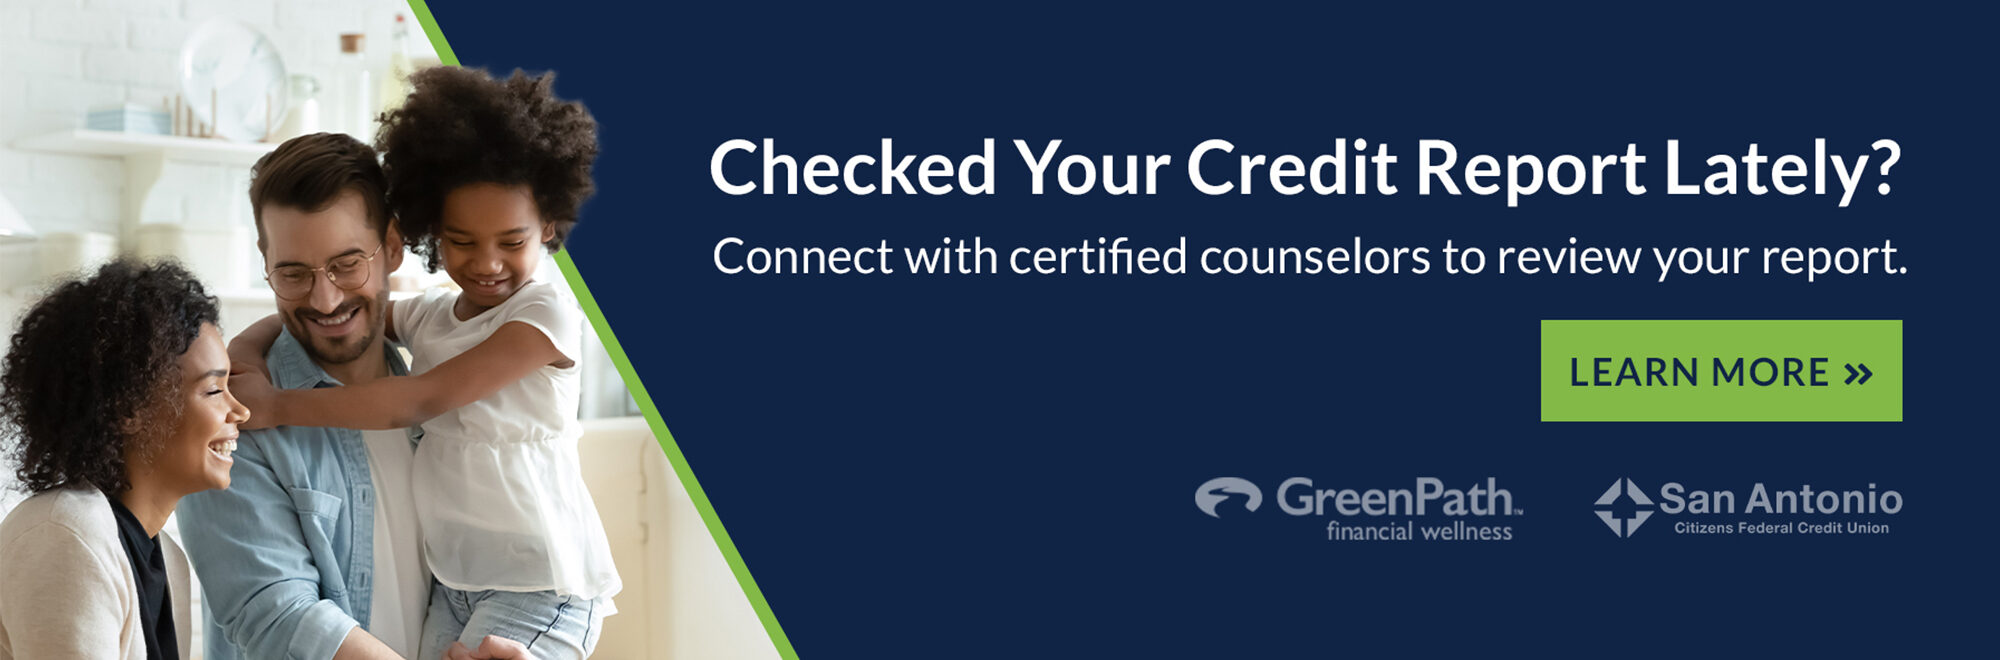 Family smiling with text reading, "Checked Your Credit Report Lately? Connect with certified counselors to review your report." Click to learn more